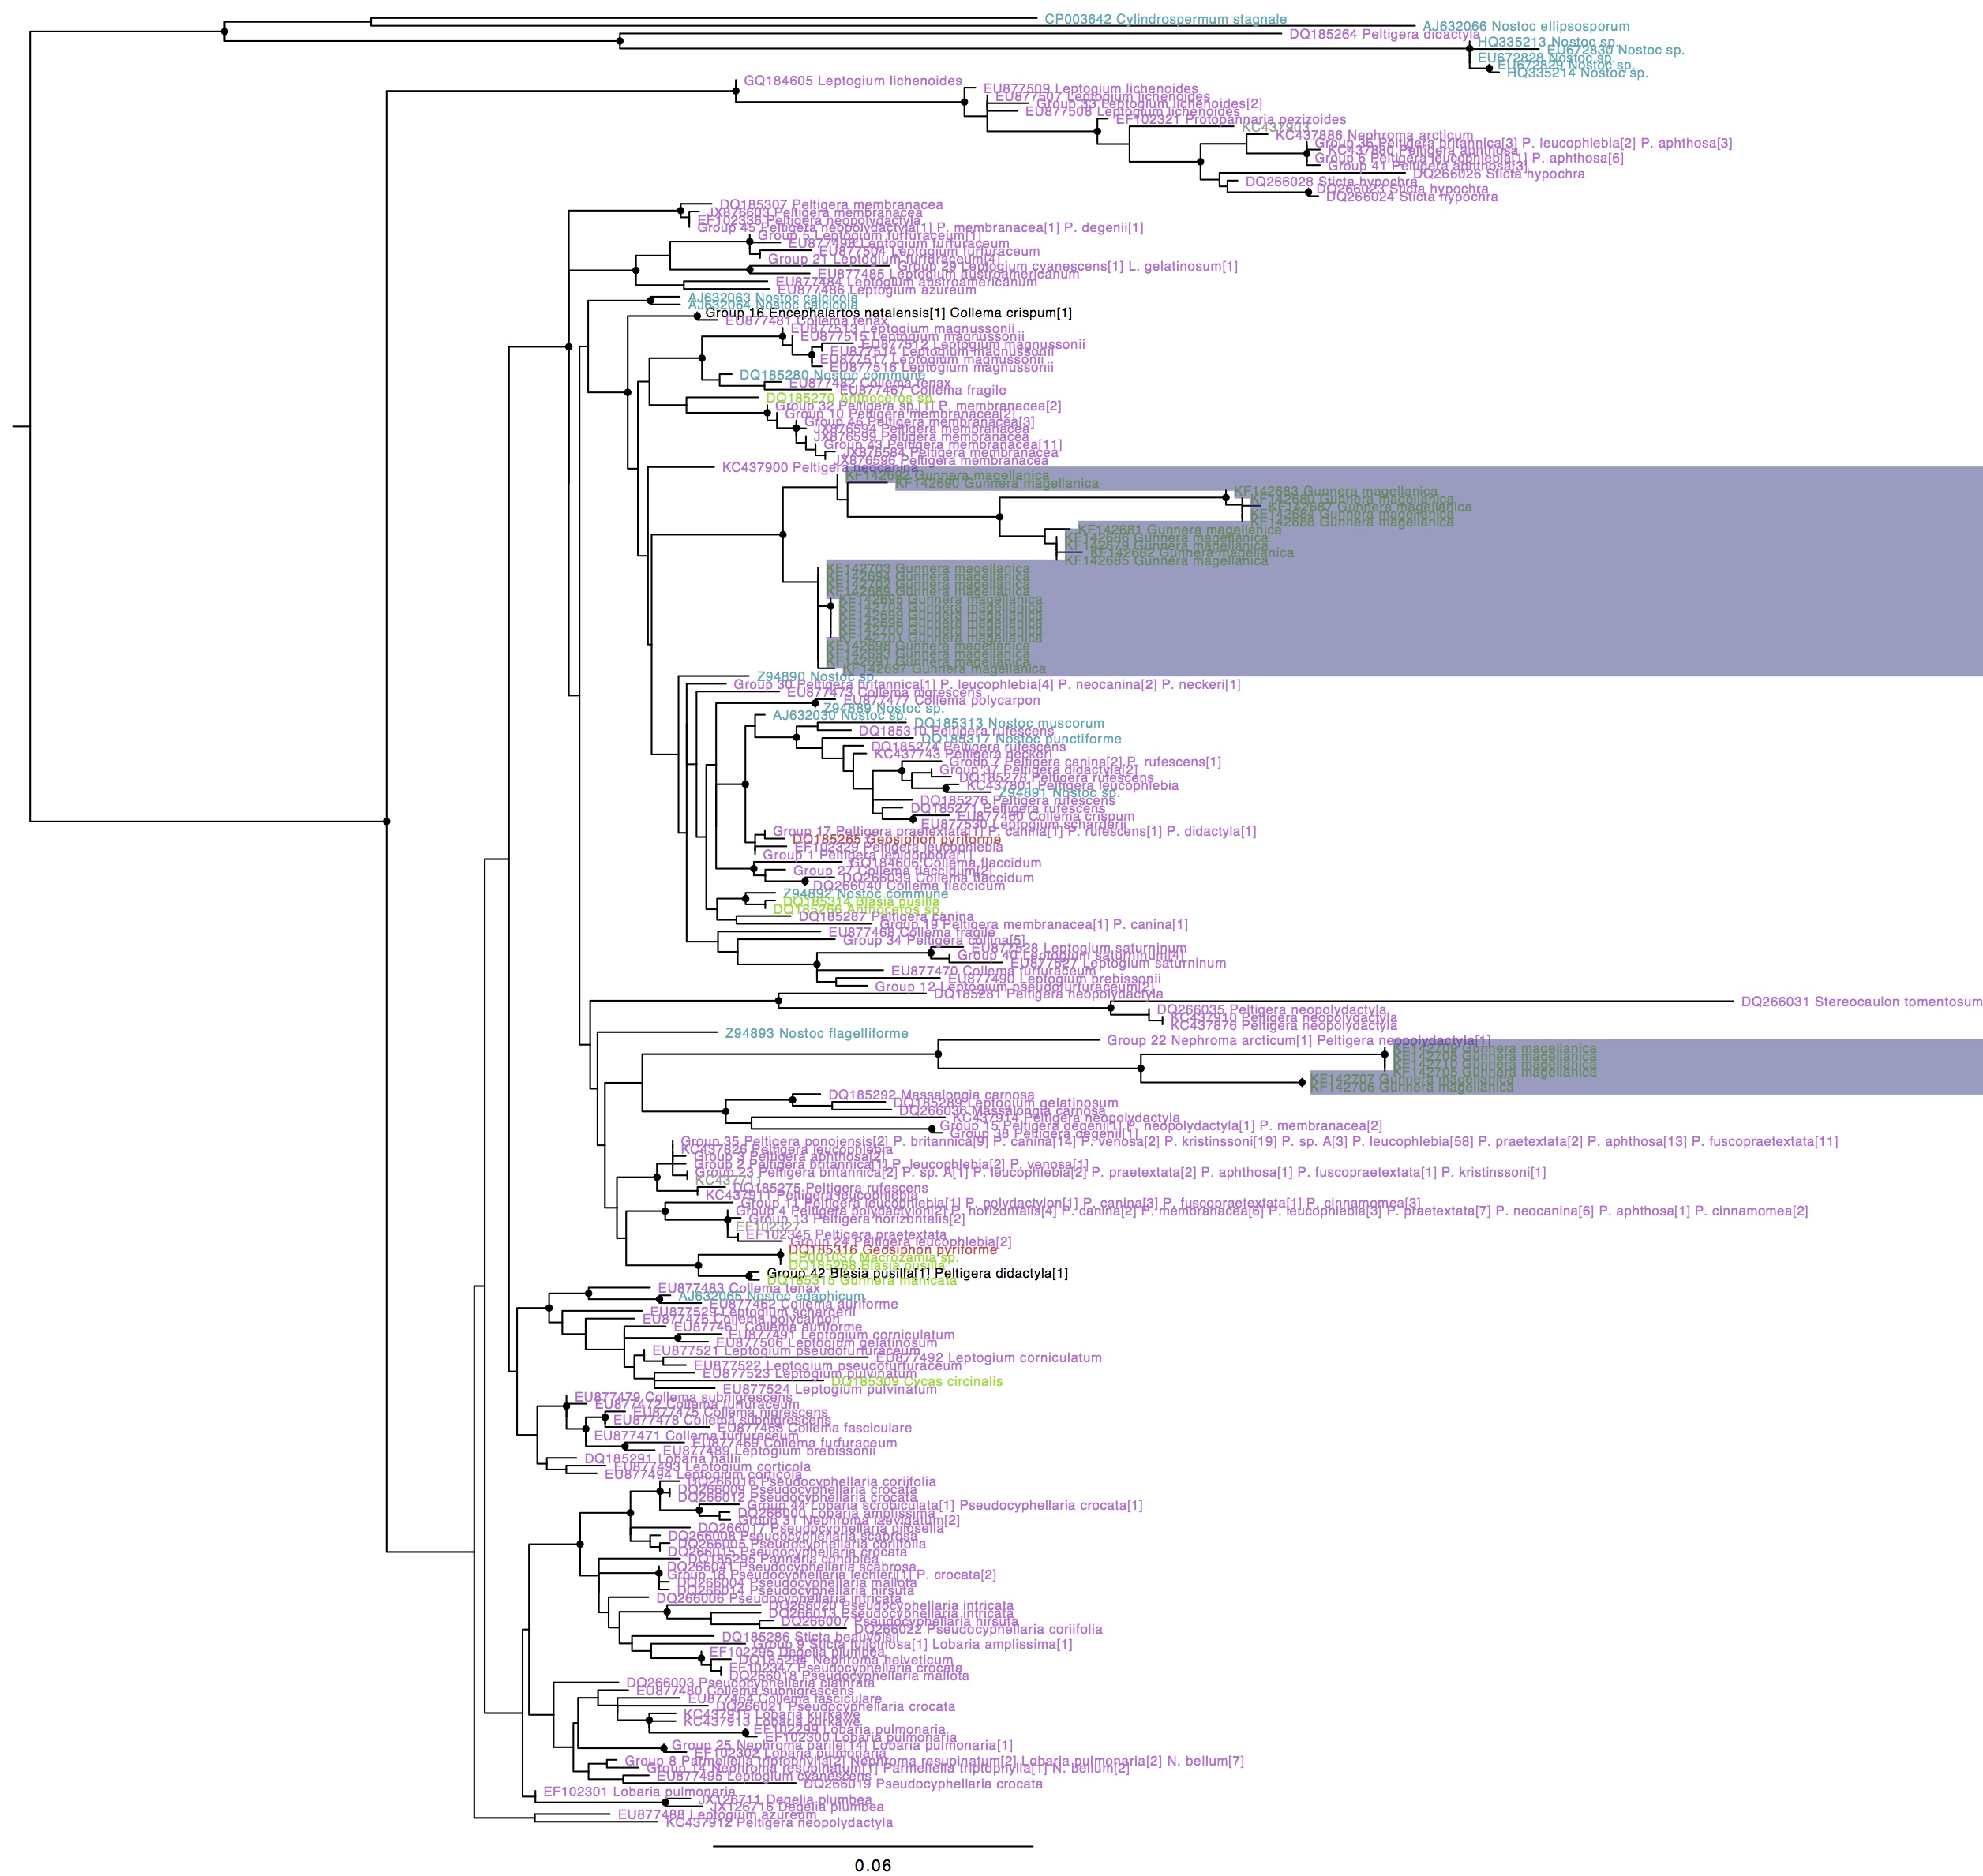 Nostoc rbcX phylogeny with Gunnera magellanica symbiont hilighted, coloured by type of association (purple: lichen photobionts, green: plant symbionts, blue: free-living, red: fungal endosymbiont). Names in black indicate genotypes found in more than one group. Circles on internal nodes indicate aLRT ≥0.9.